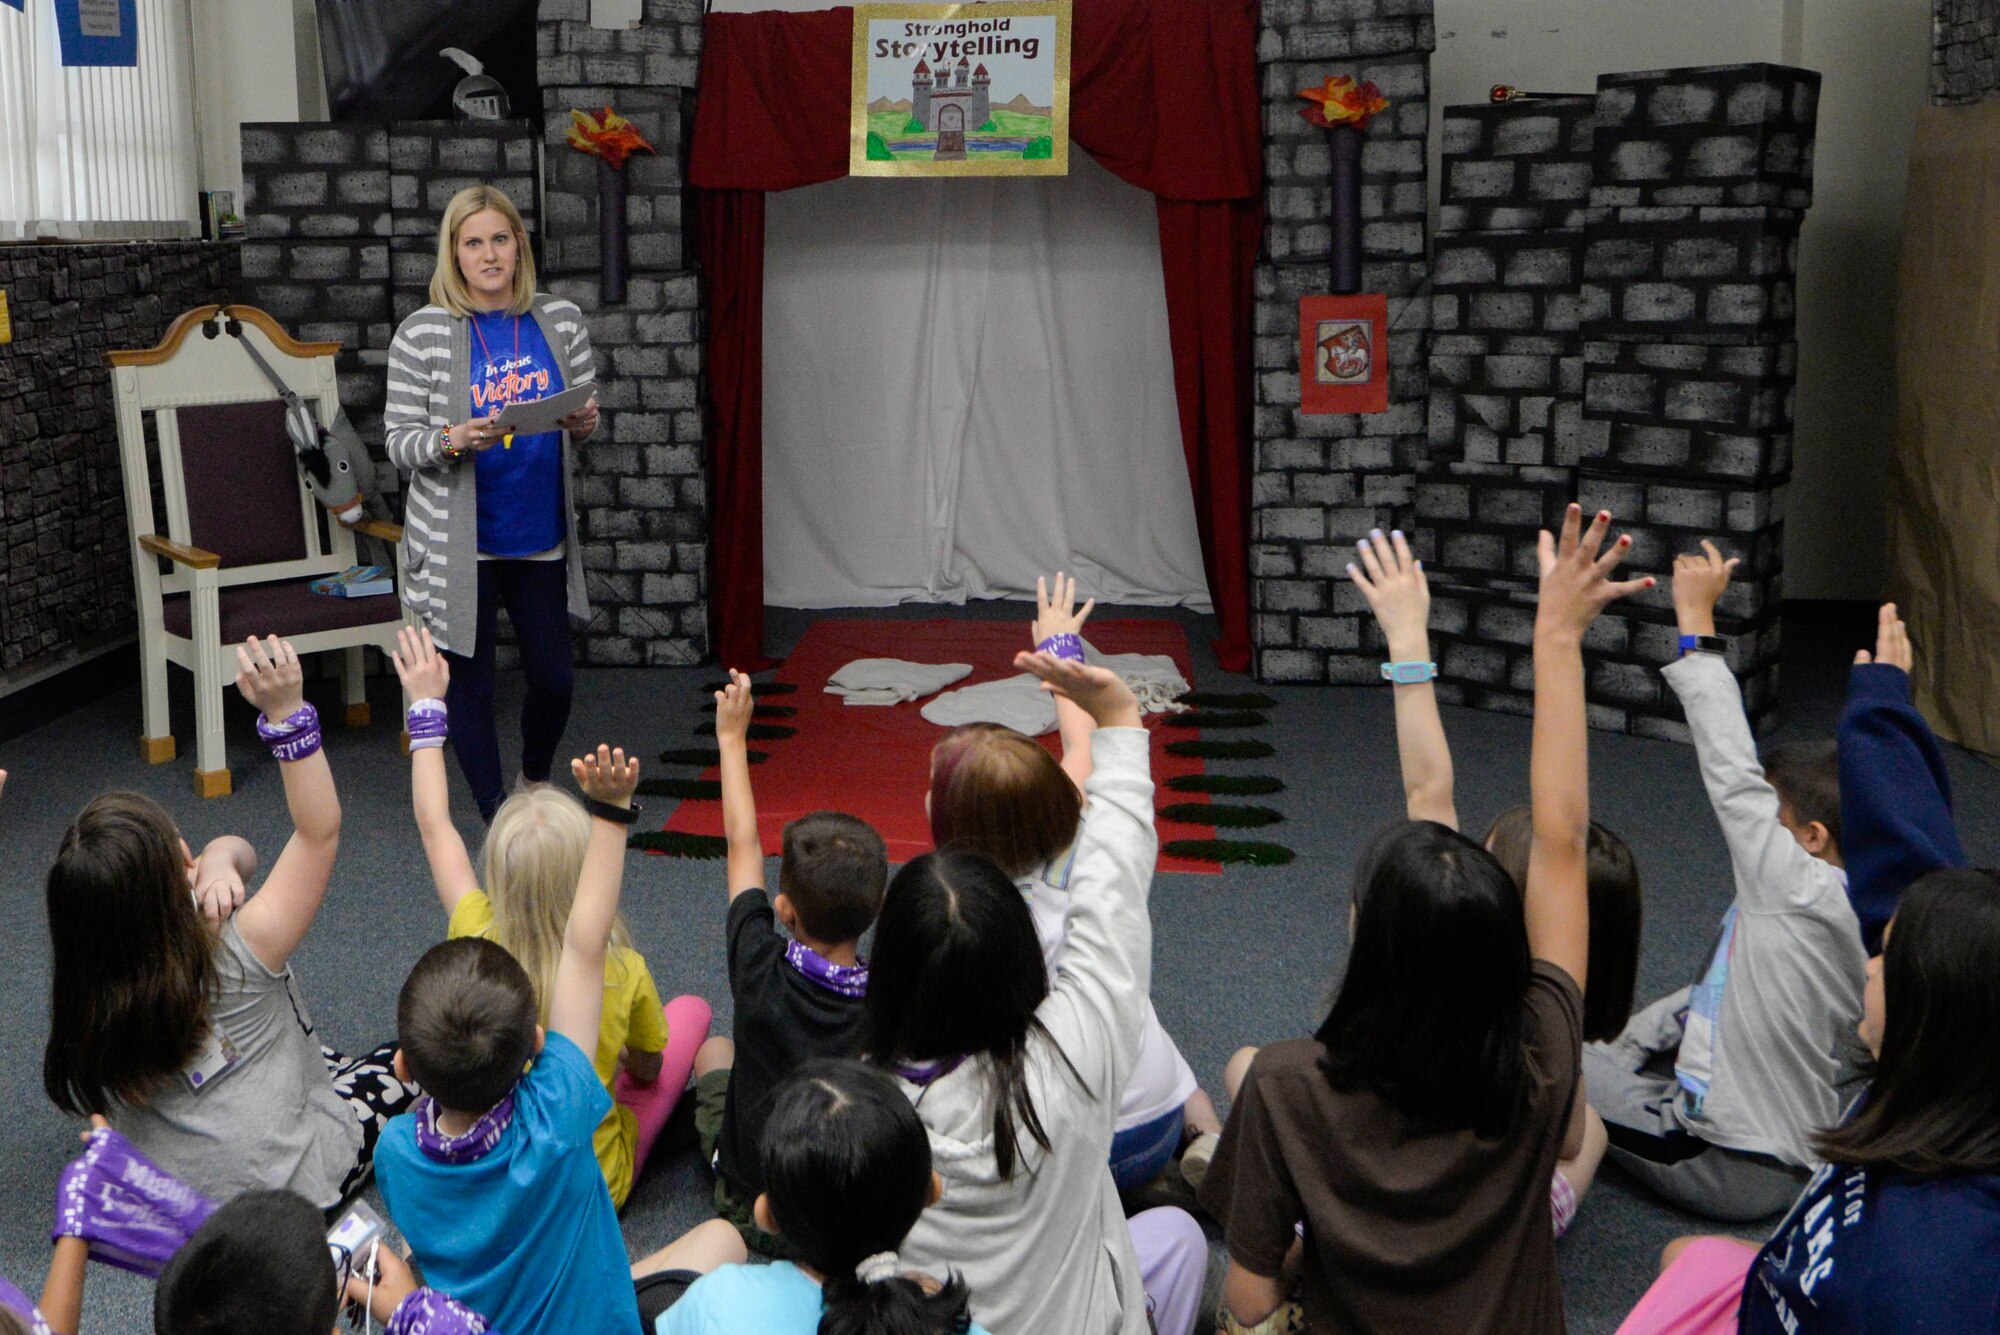 Children participate in story telling during Yokota’s annual Vacation Bible School at Yokota Air Base, Japan, June 23, 2017. Approximately 150 children attended the VBS where they participated in various activities such as arts and crafts, storytelling and snack time. The chapel was decorated to represent a medieval castle for the theme of ‘Mighty Fortress’.